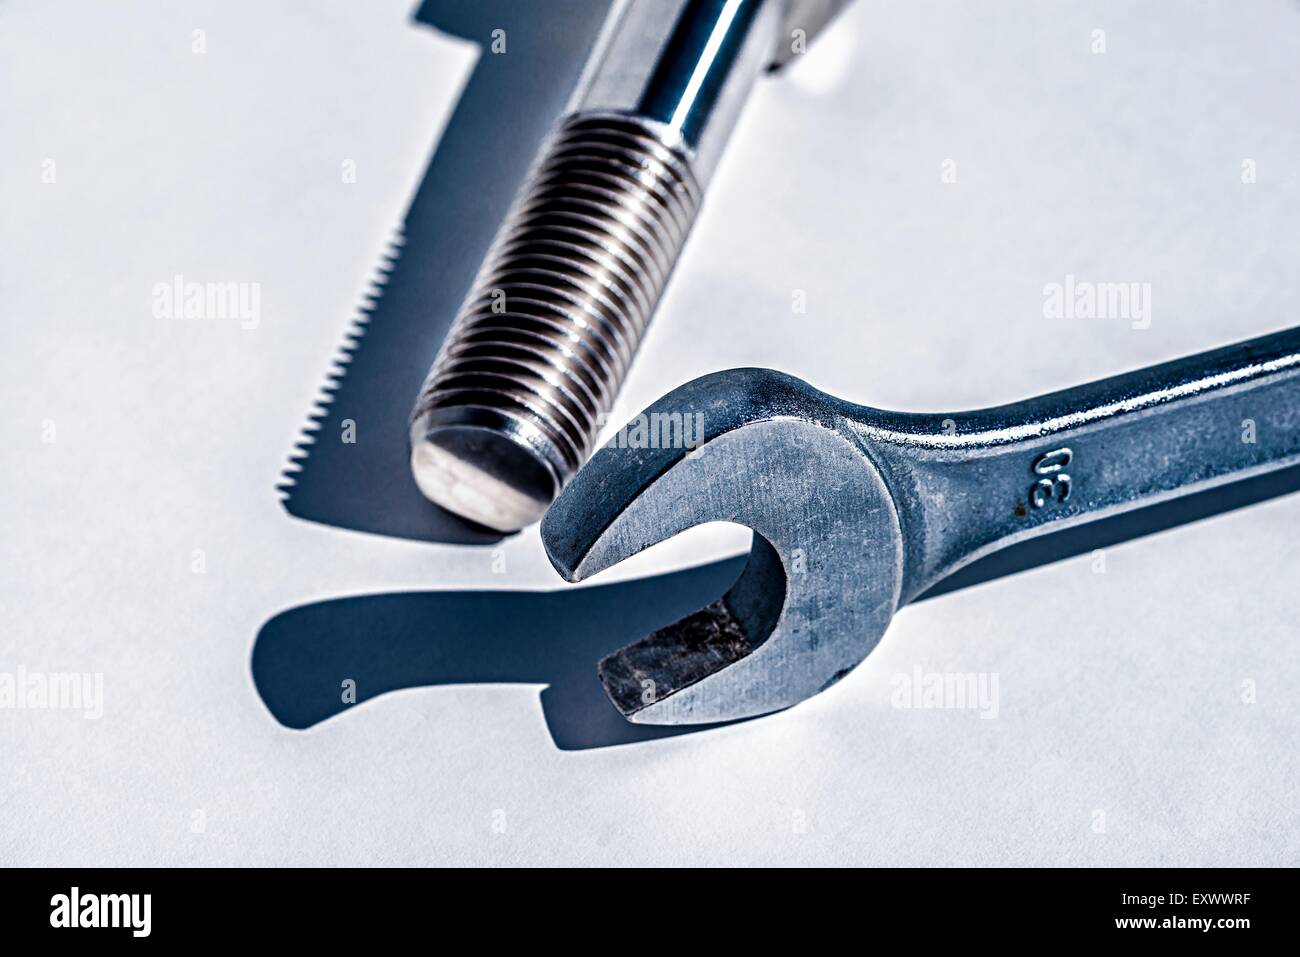 Screw with wrench Stock Photo